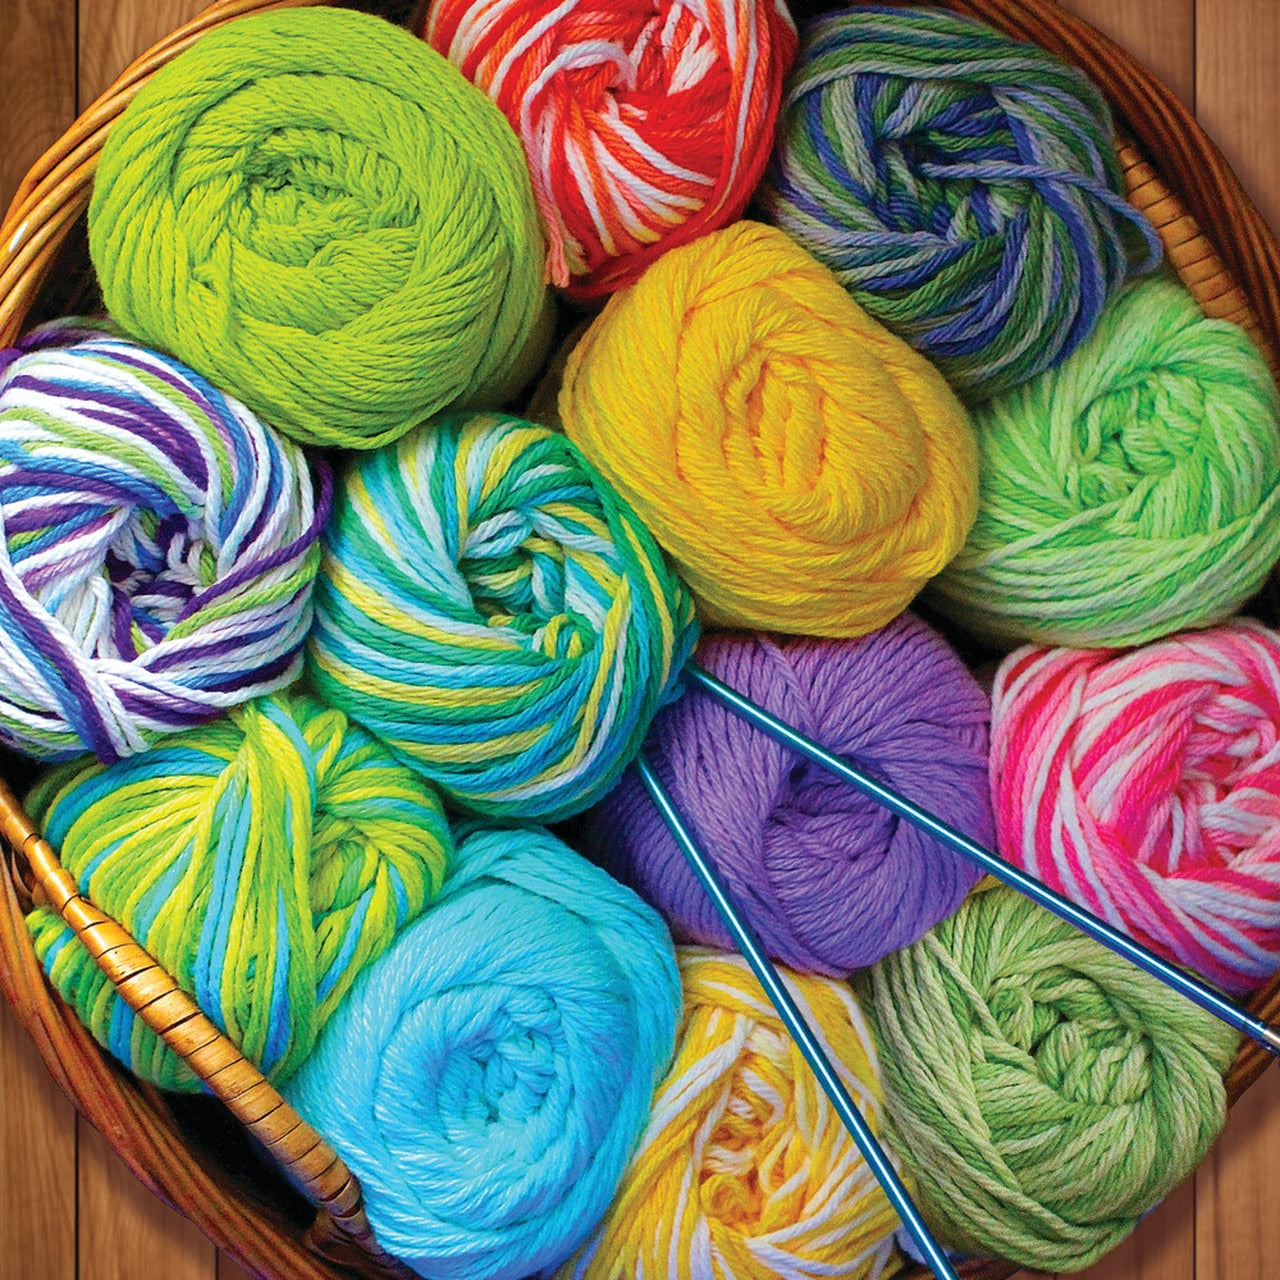 Colorful Yarn (500 pc puzzle)